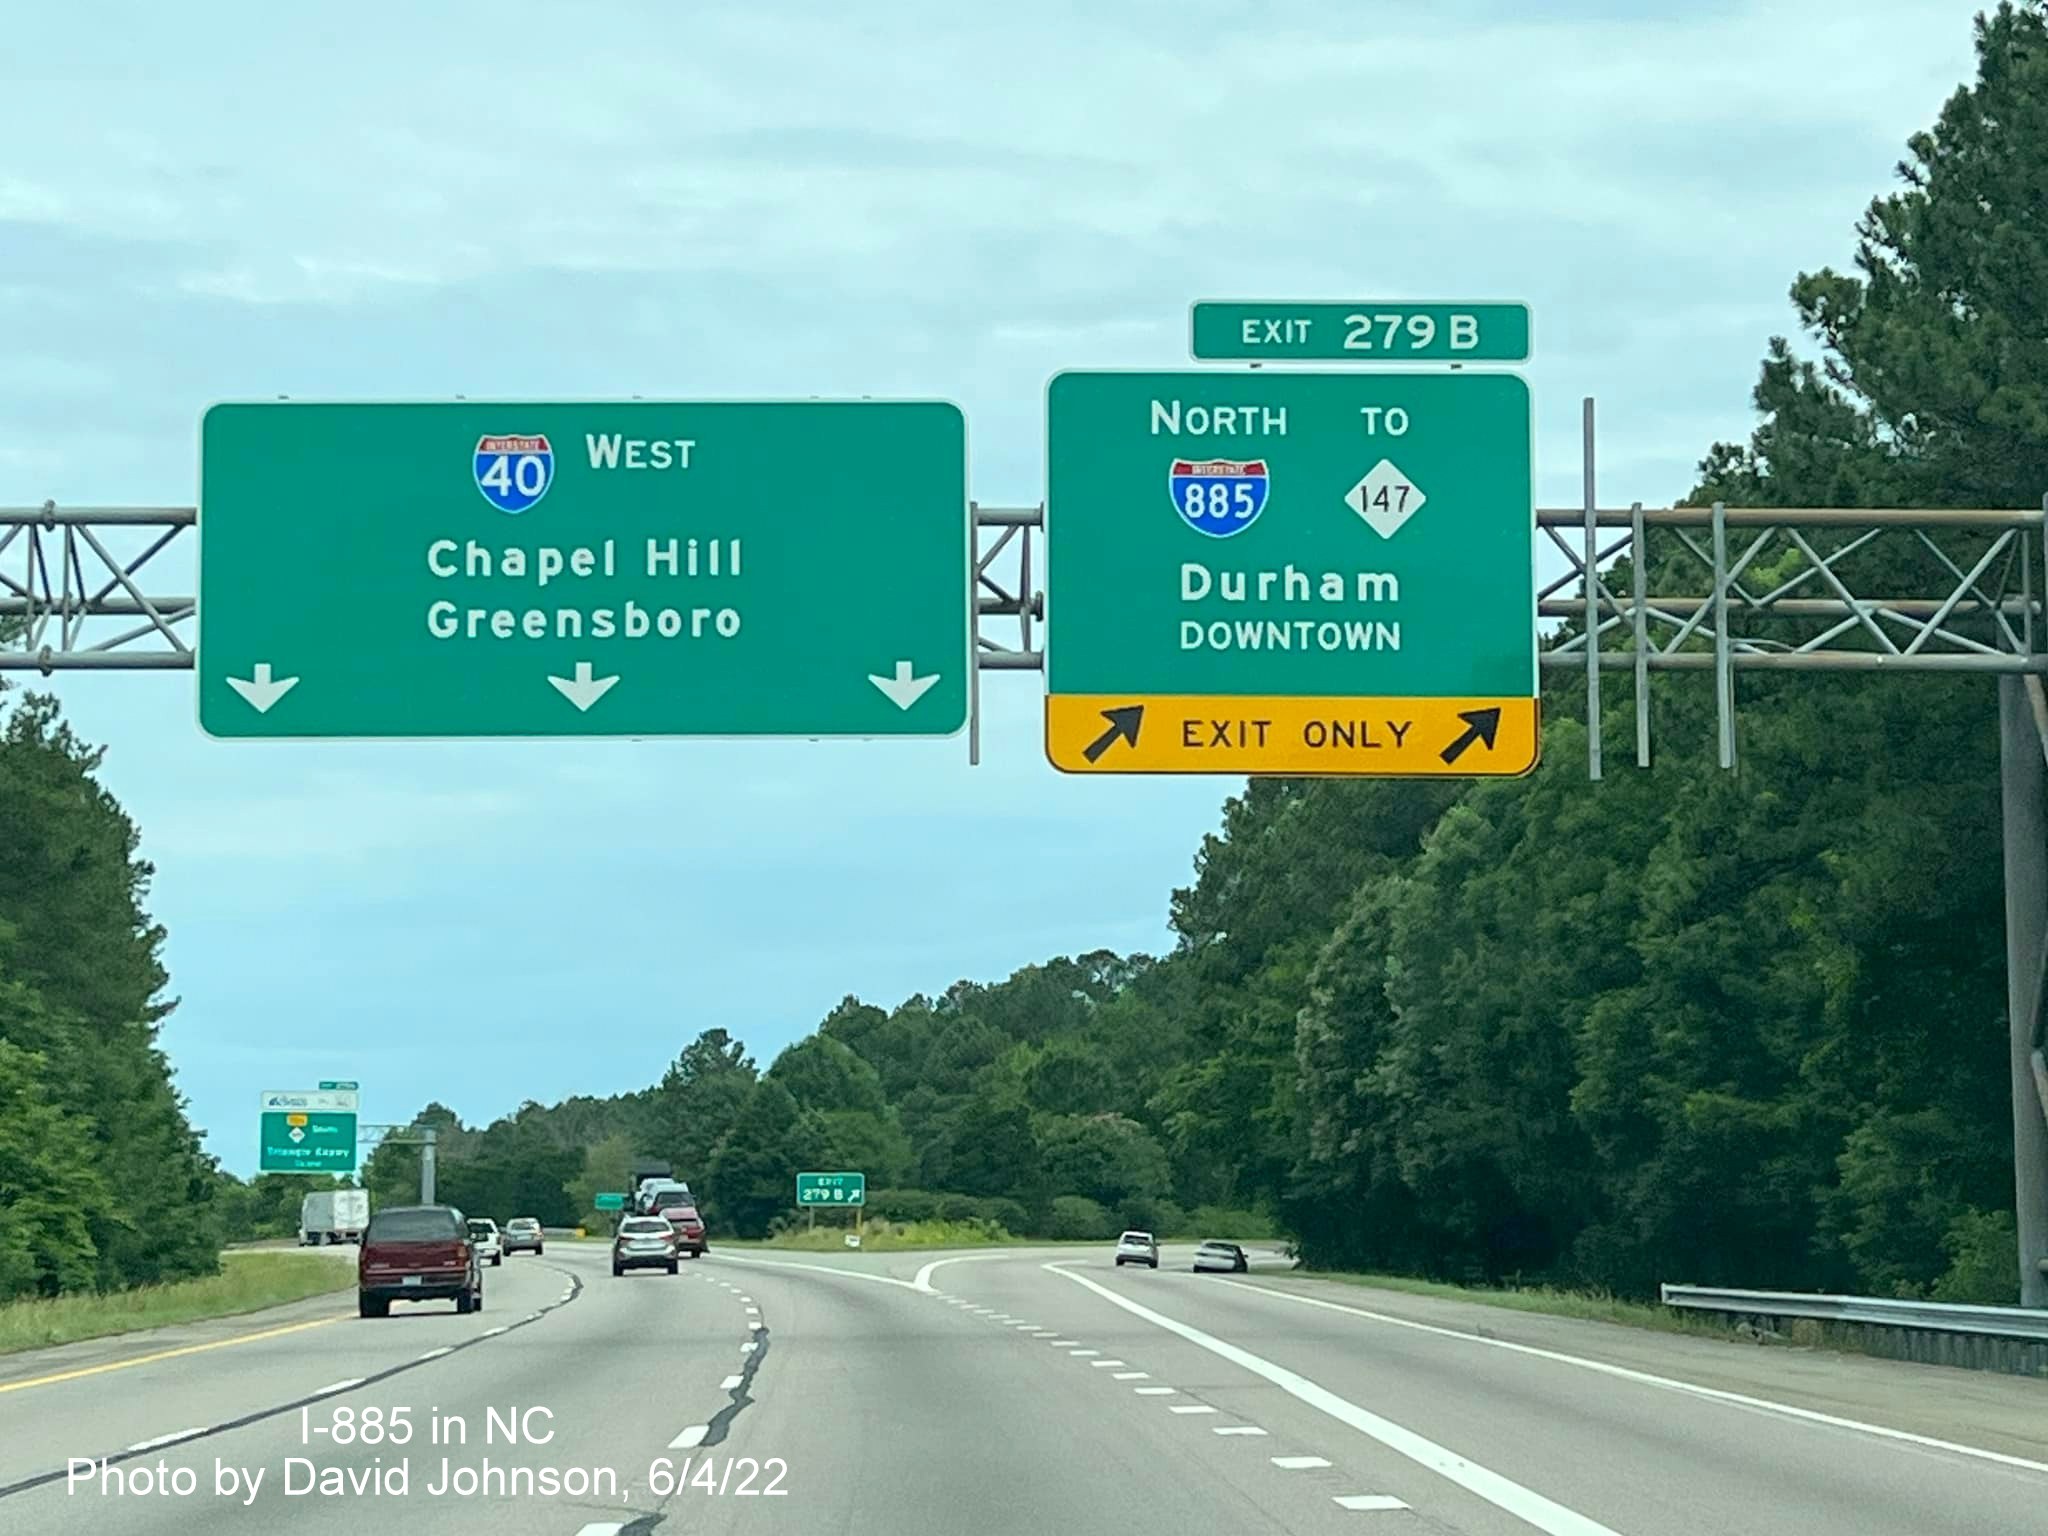 Image of new ramp signage with I-885 shield for Durham Freeway exit on I-40 West, by David Johnson, June 2022